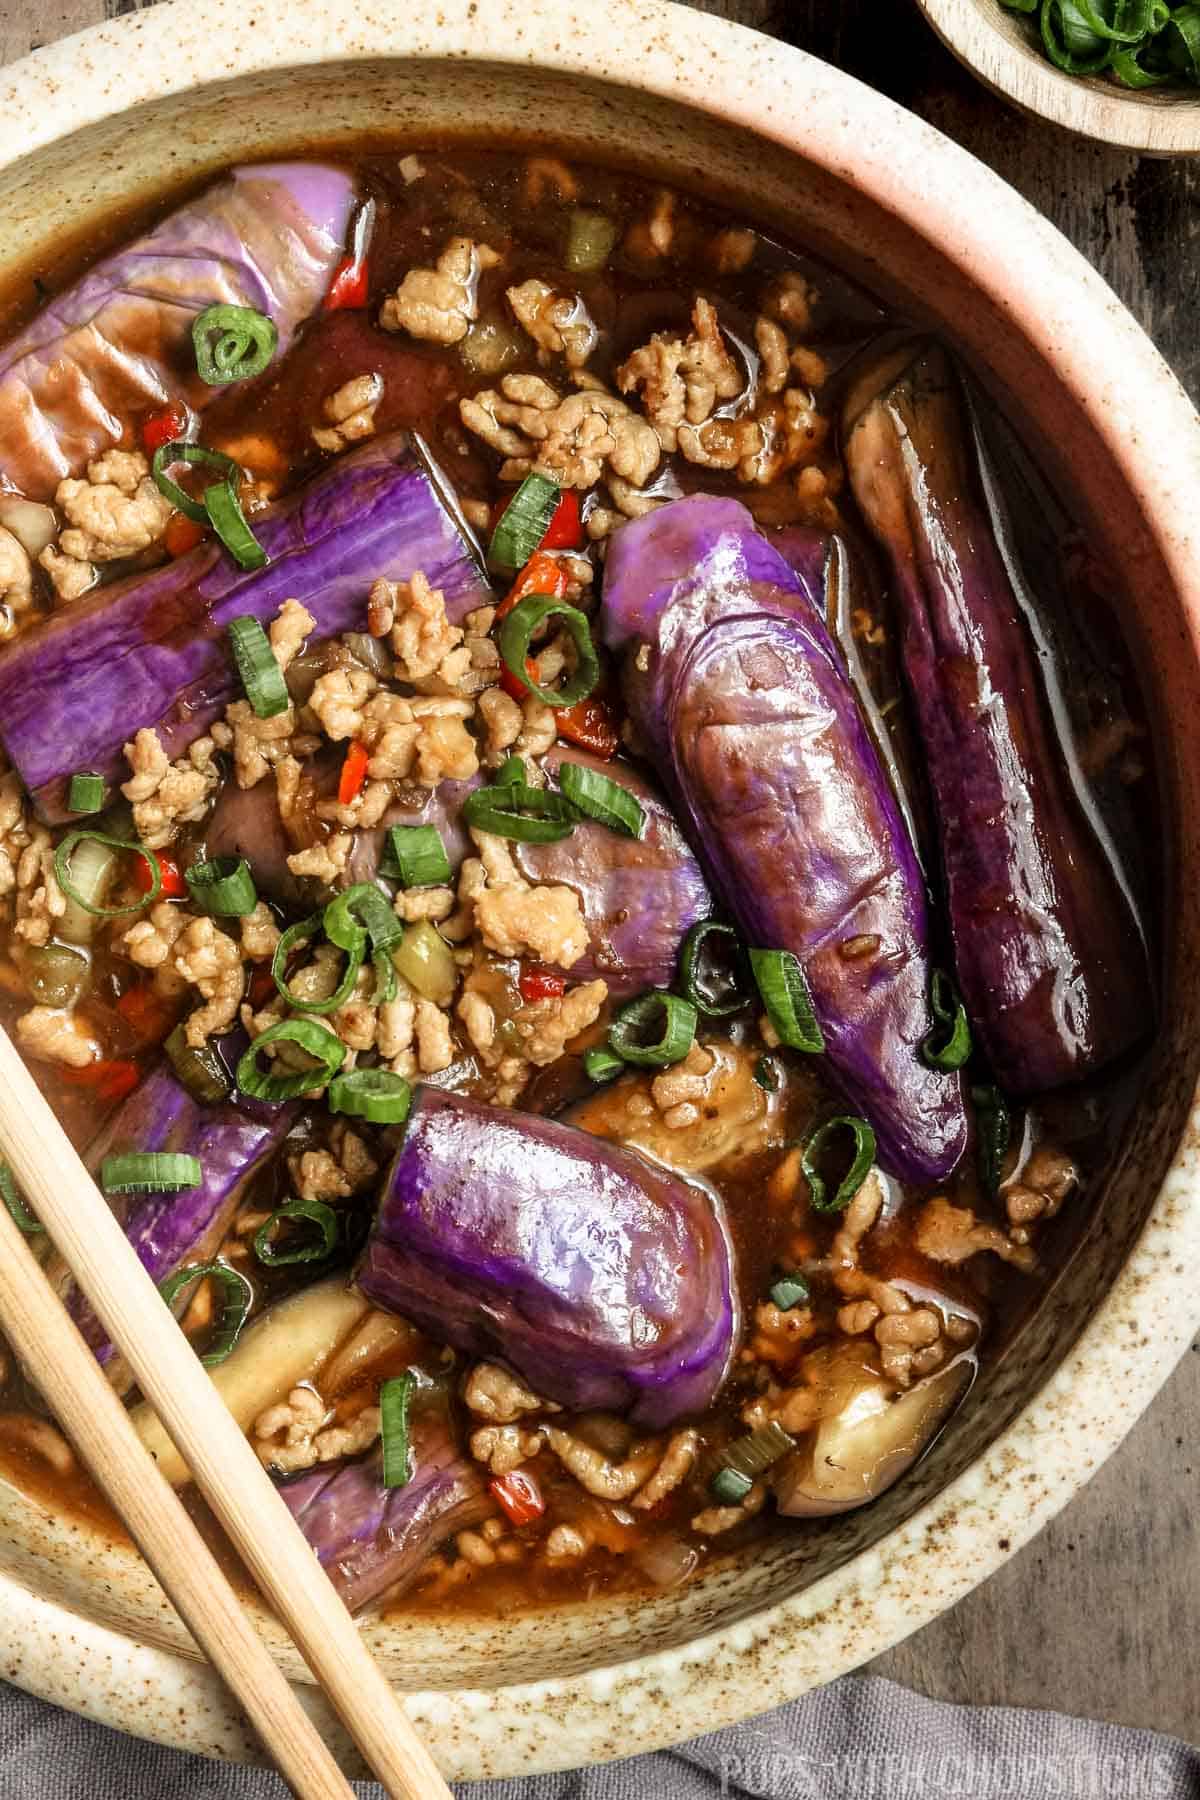 A bowl of eggplant in a sauce with chopsticks.